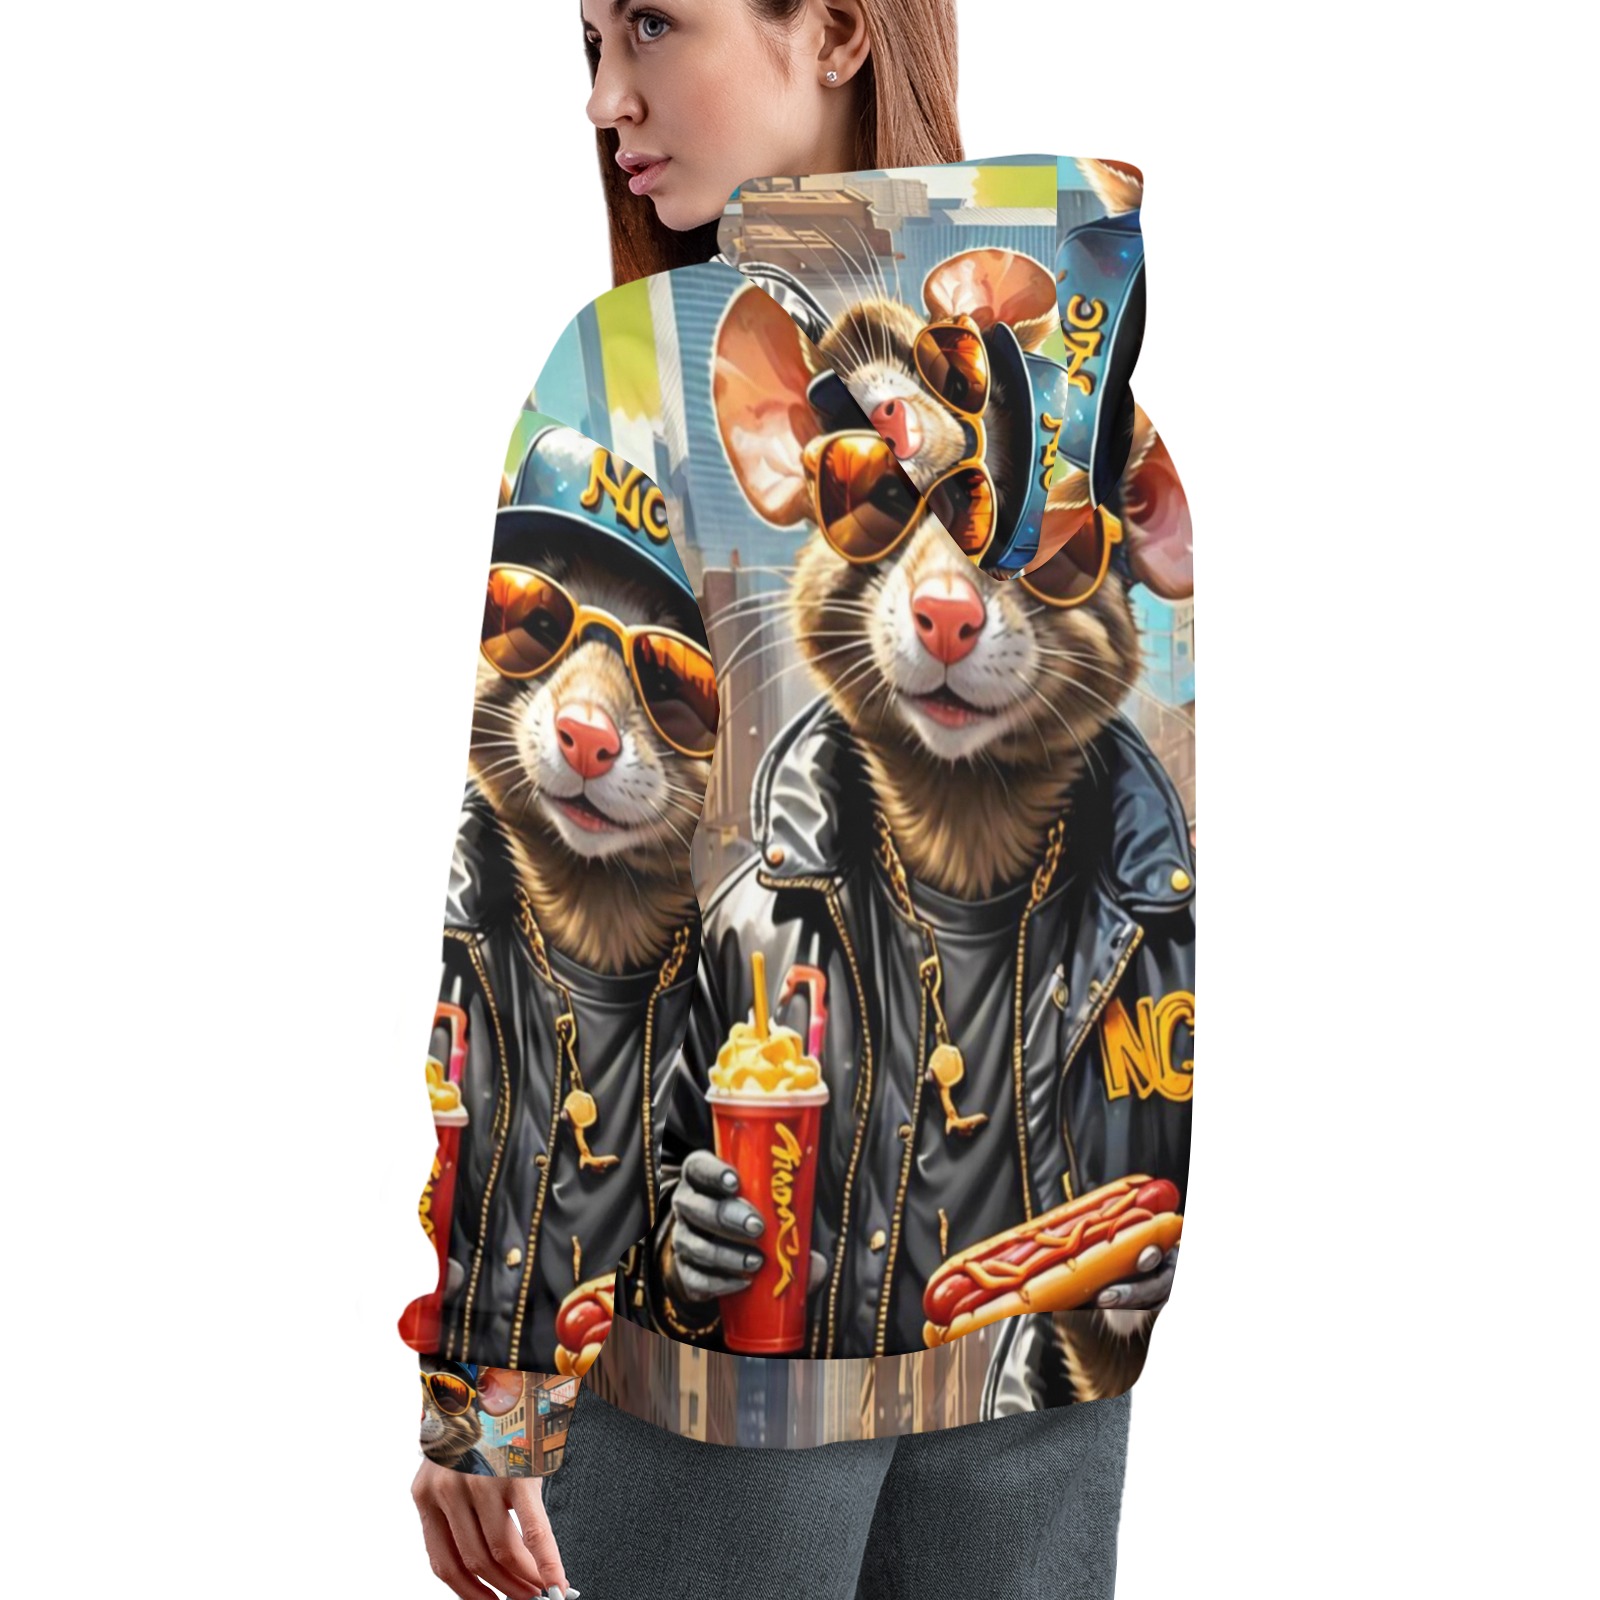 HOT DOG EATING NYC RAT 7 Women's All Over Print Hoodie (Model H61)